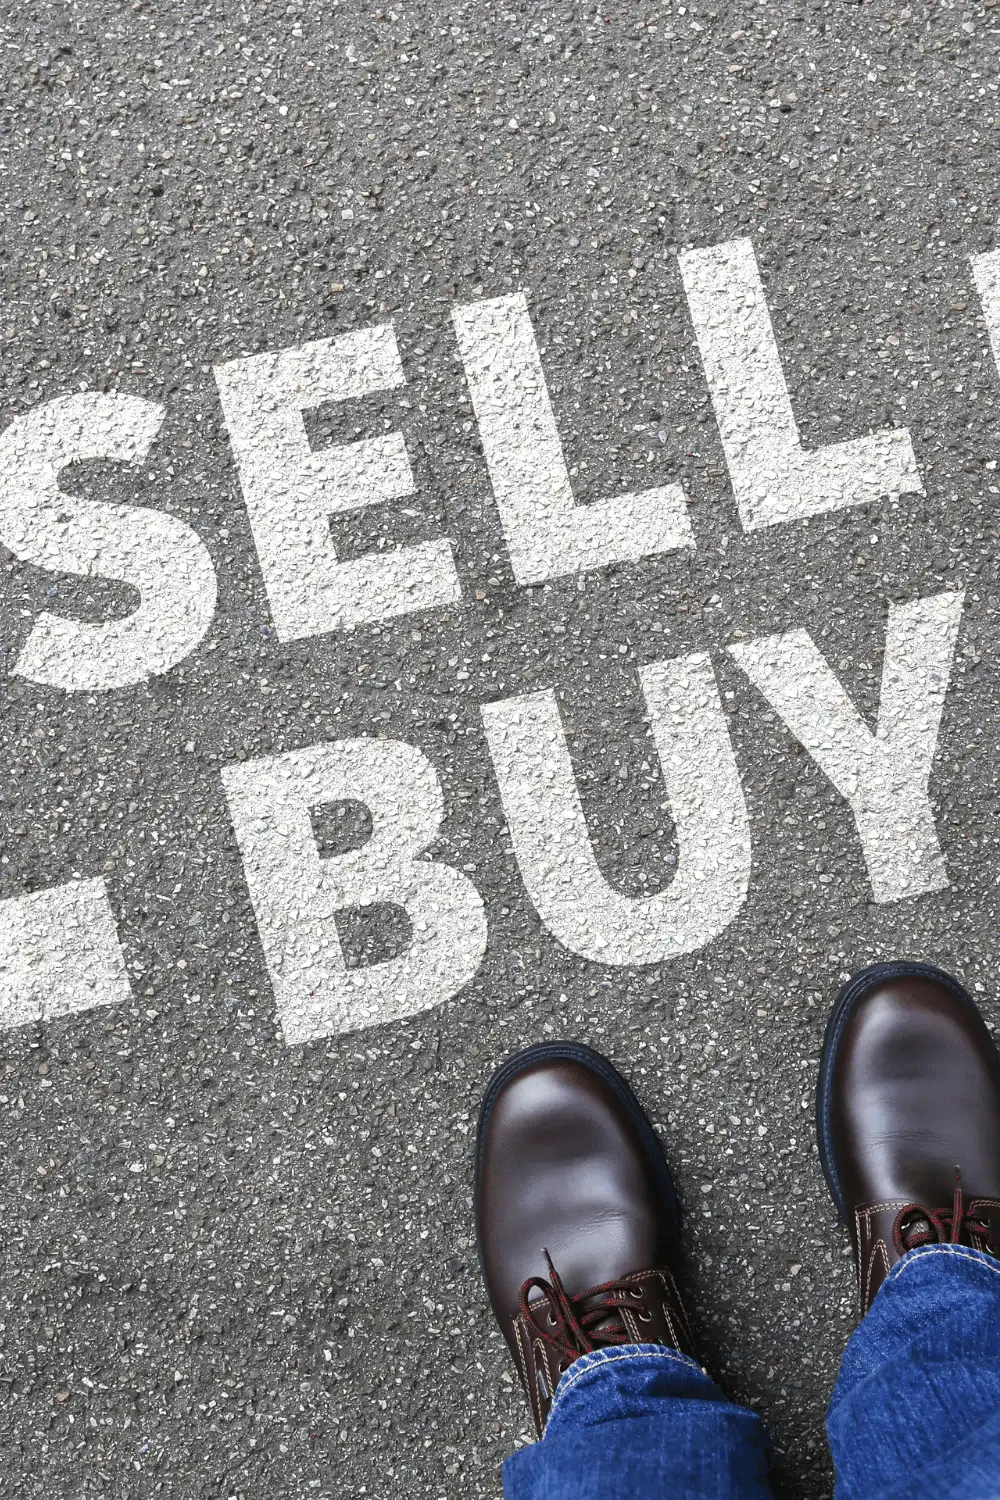 The Practical Business of Buy & Sell